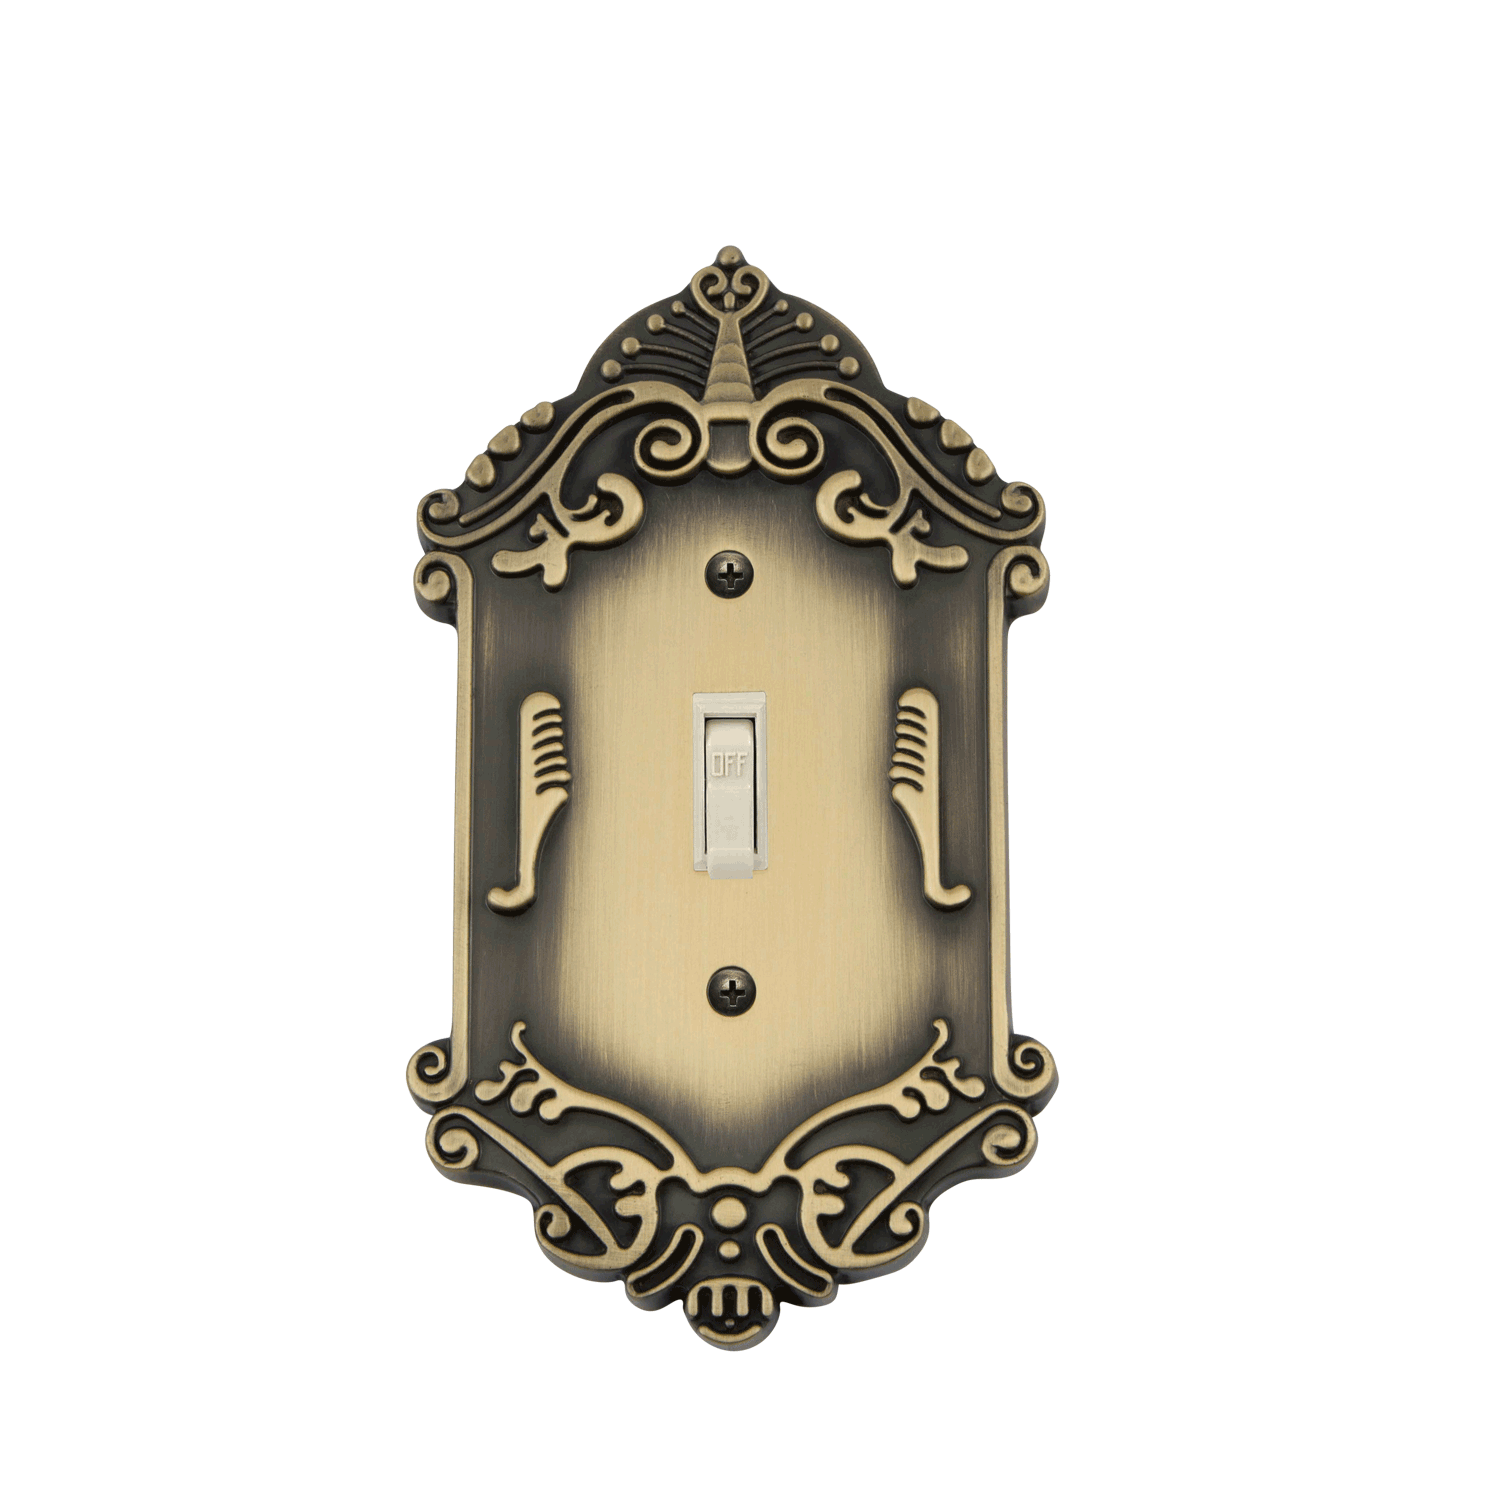 Nostalgic Warehouse Electrical Switch Plates, Wall Plates and Outlet Covers that match Vintage and Period styles and designs